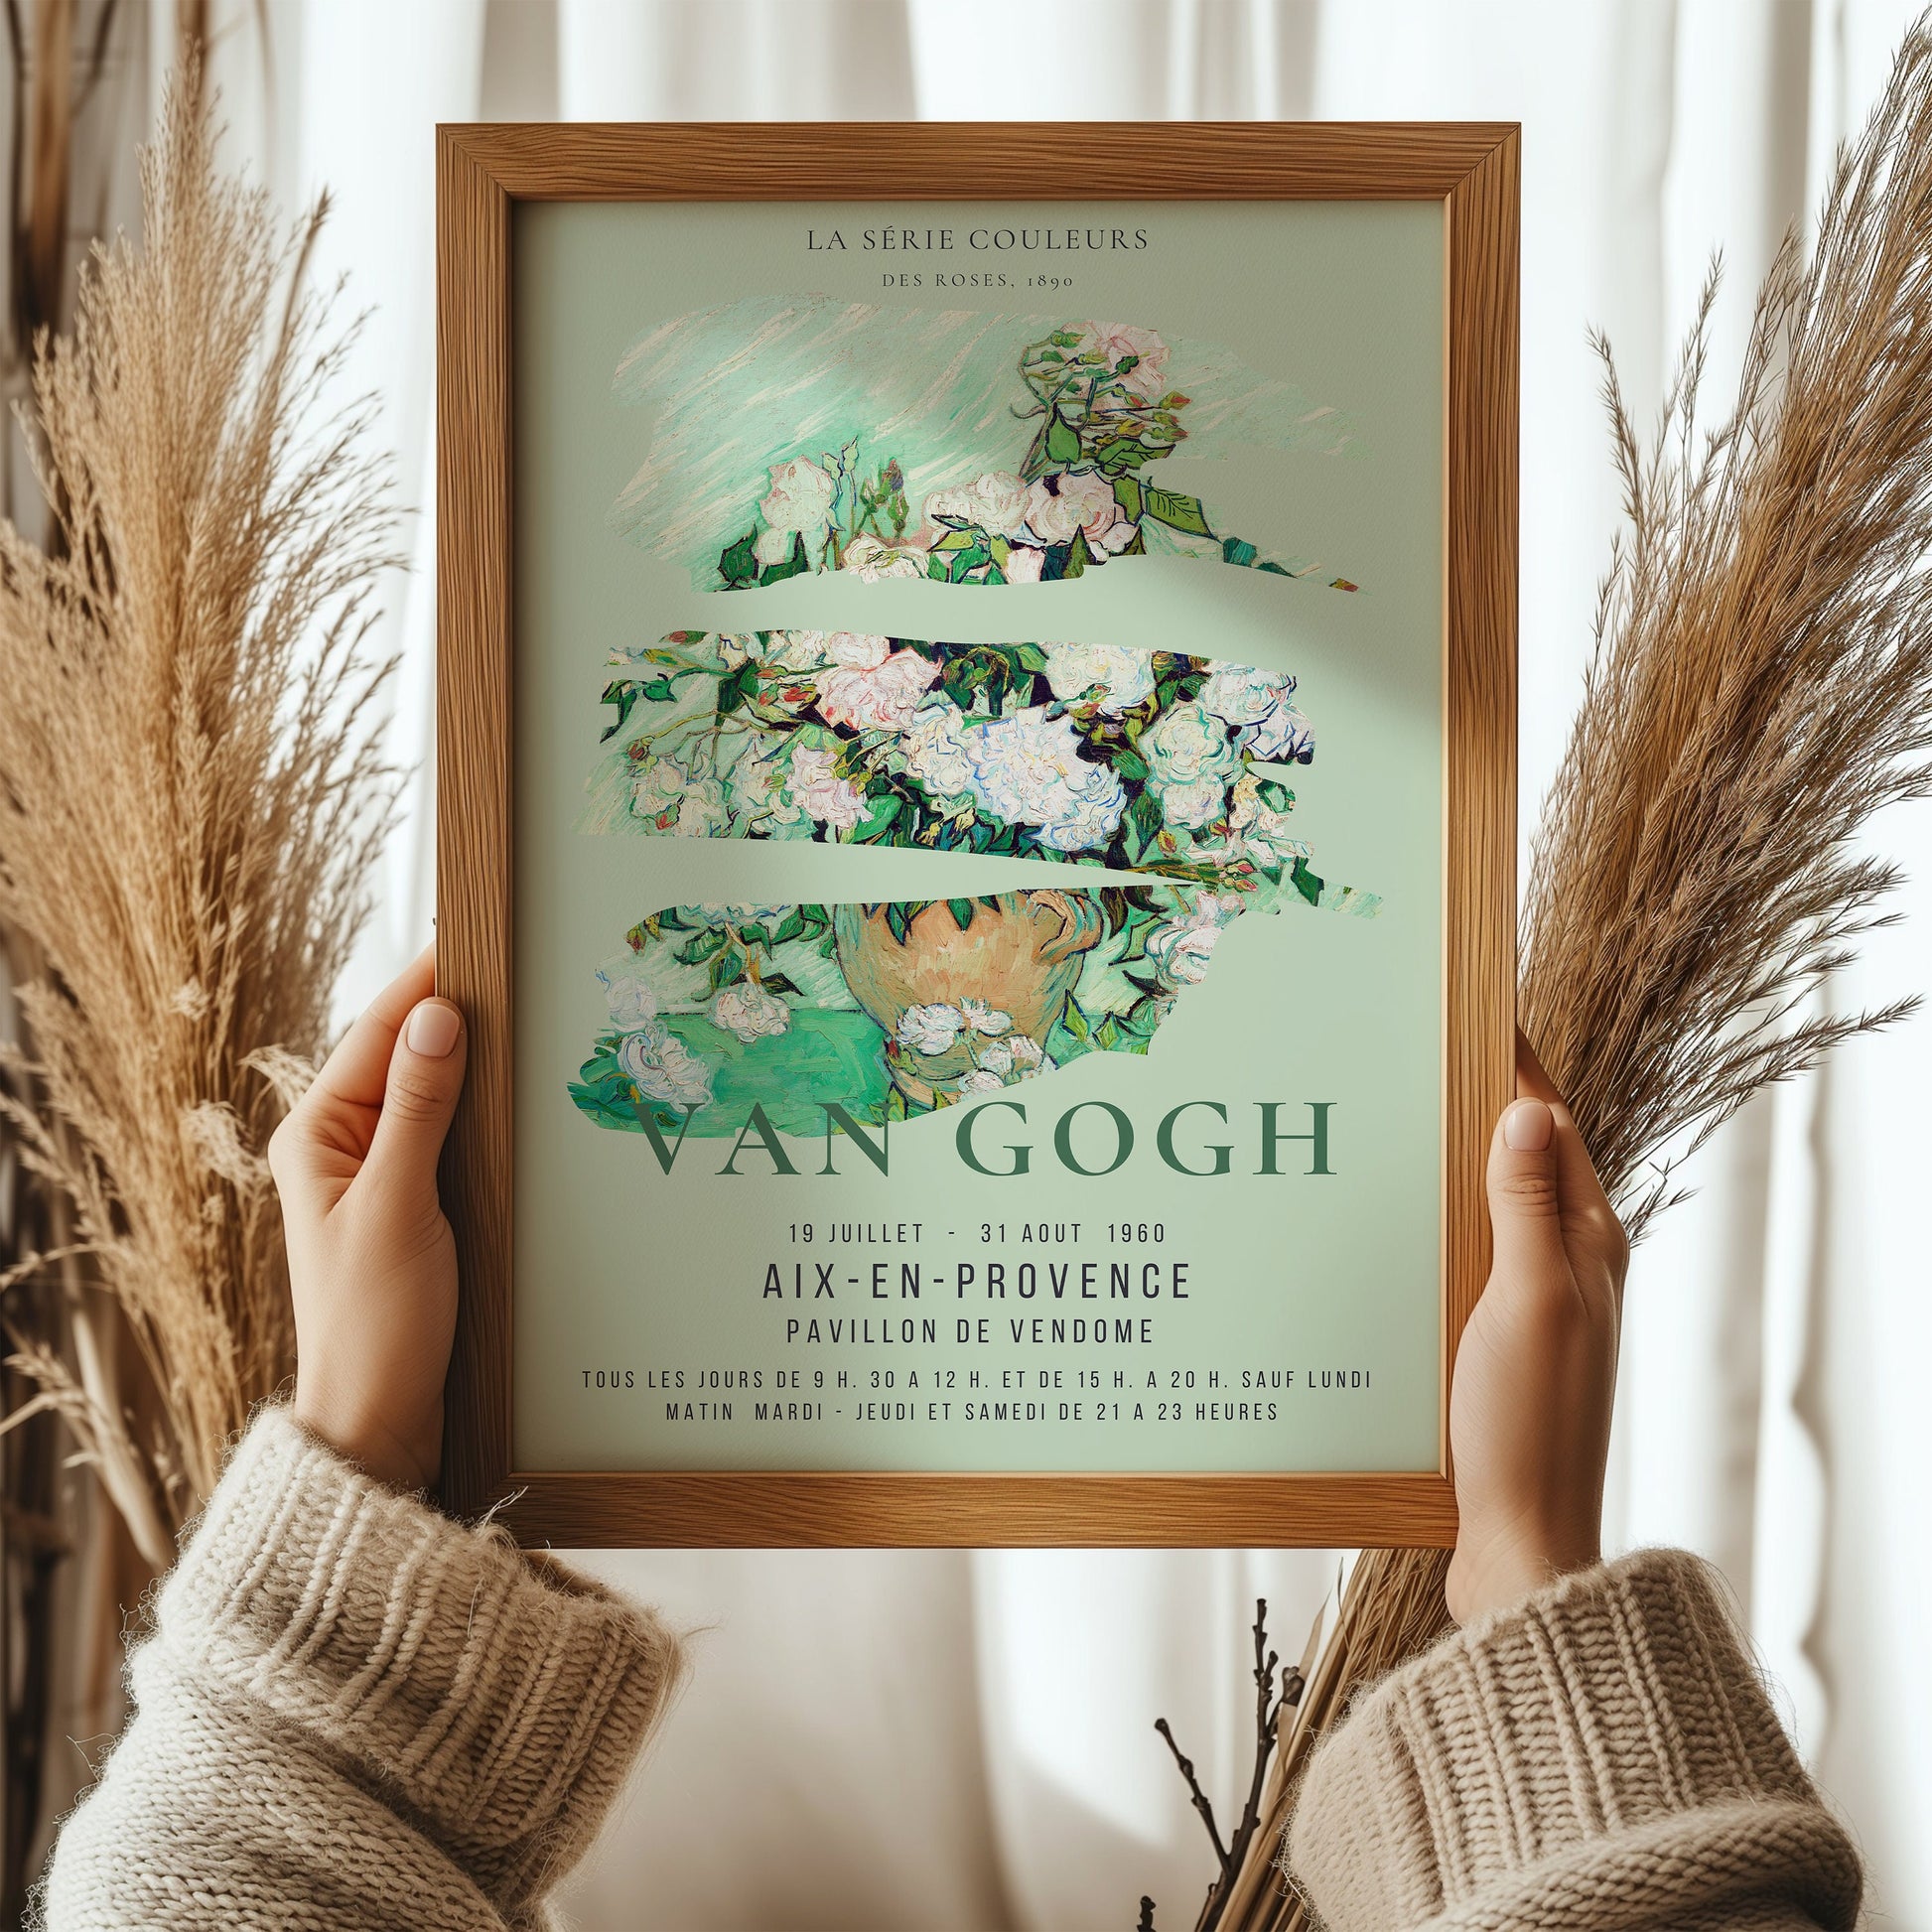 Van Gogh Colour Series ROSES Exhibition Museum Poster Fine Art Painting Vintage Famous Ready to hang Framed Home Office Decor Gift Idea